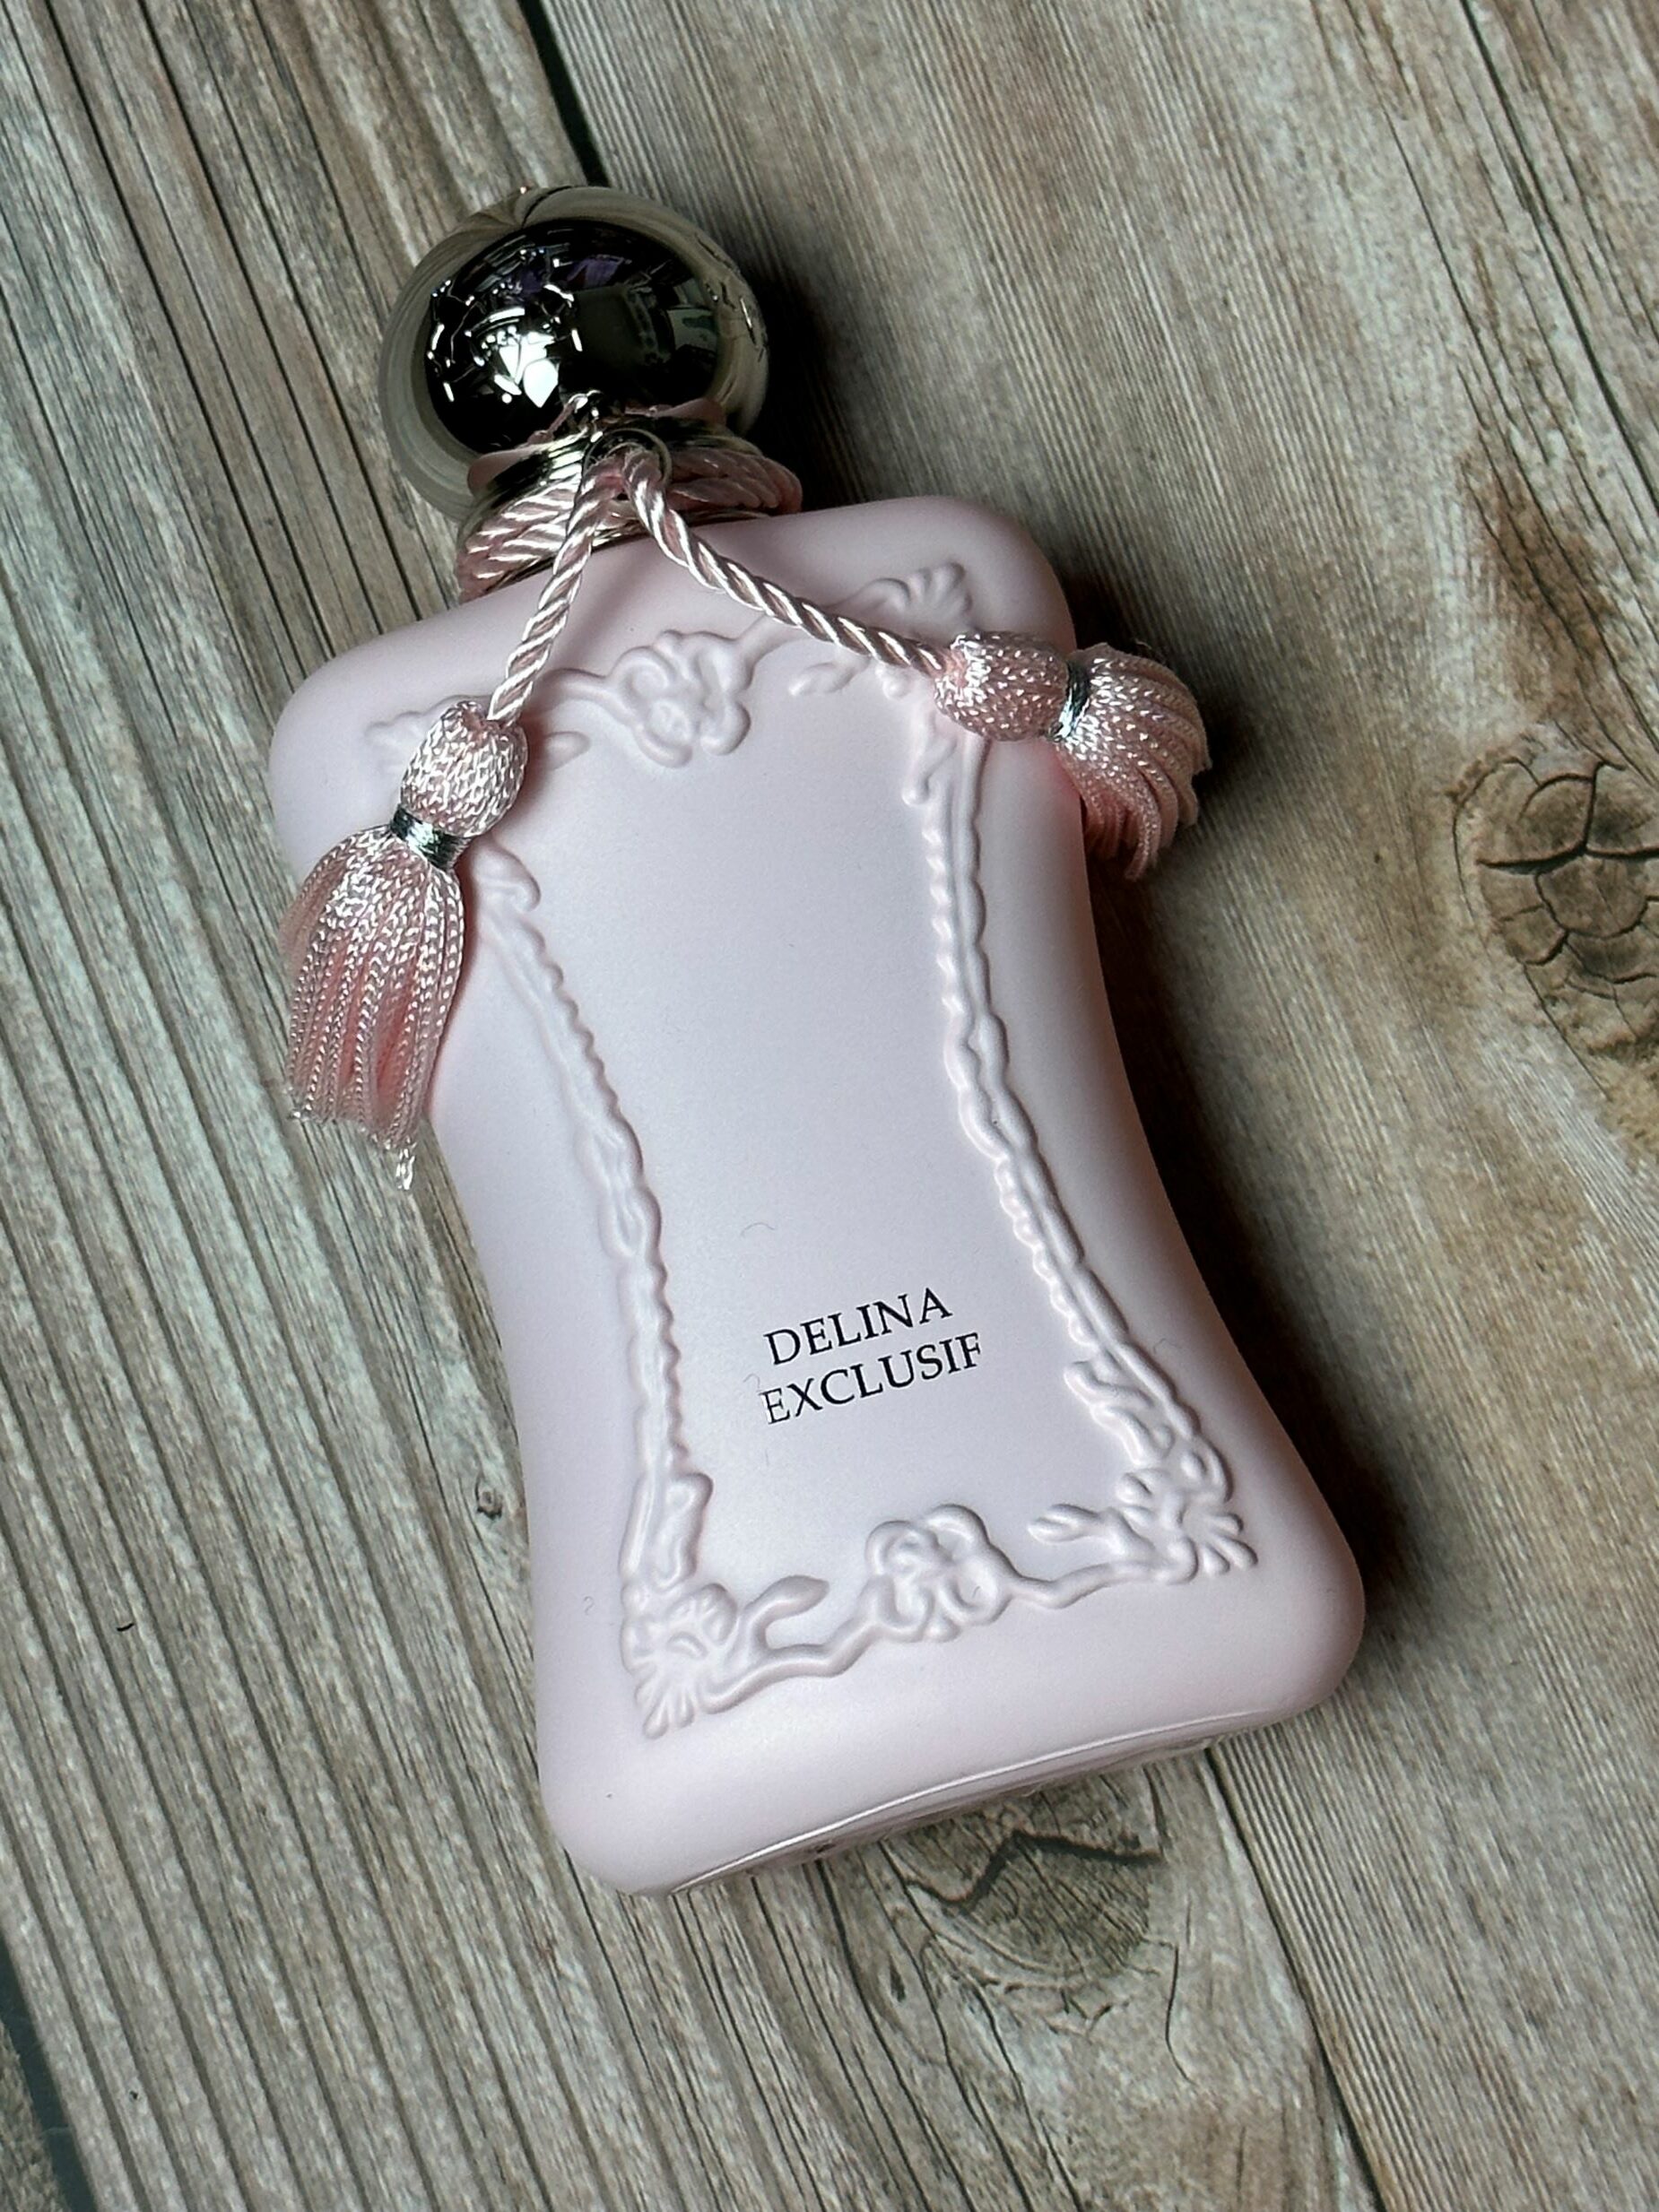 An image of a bottle of the Delina Exclusif perfume bottle. 